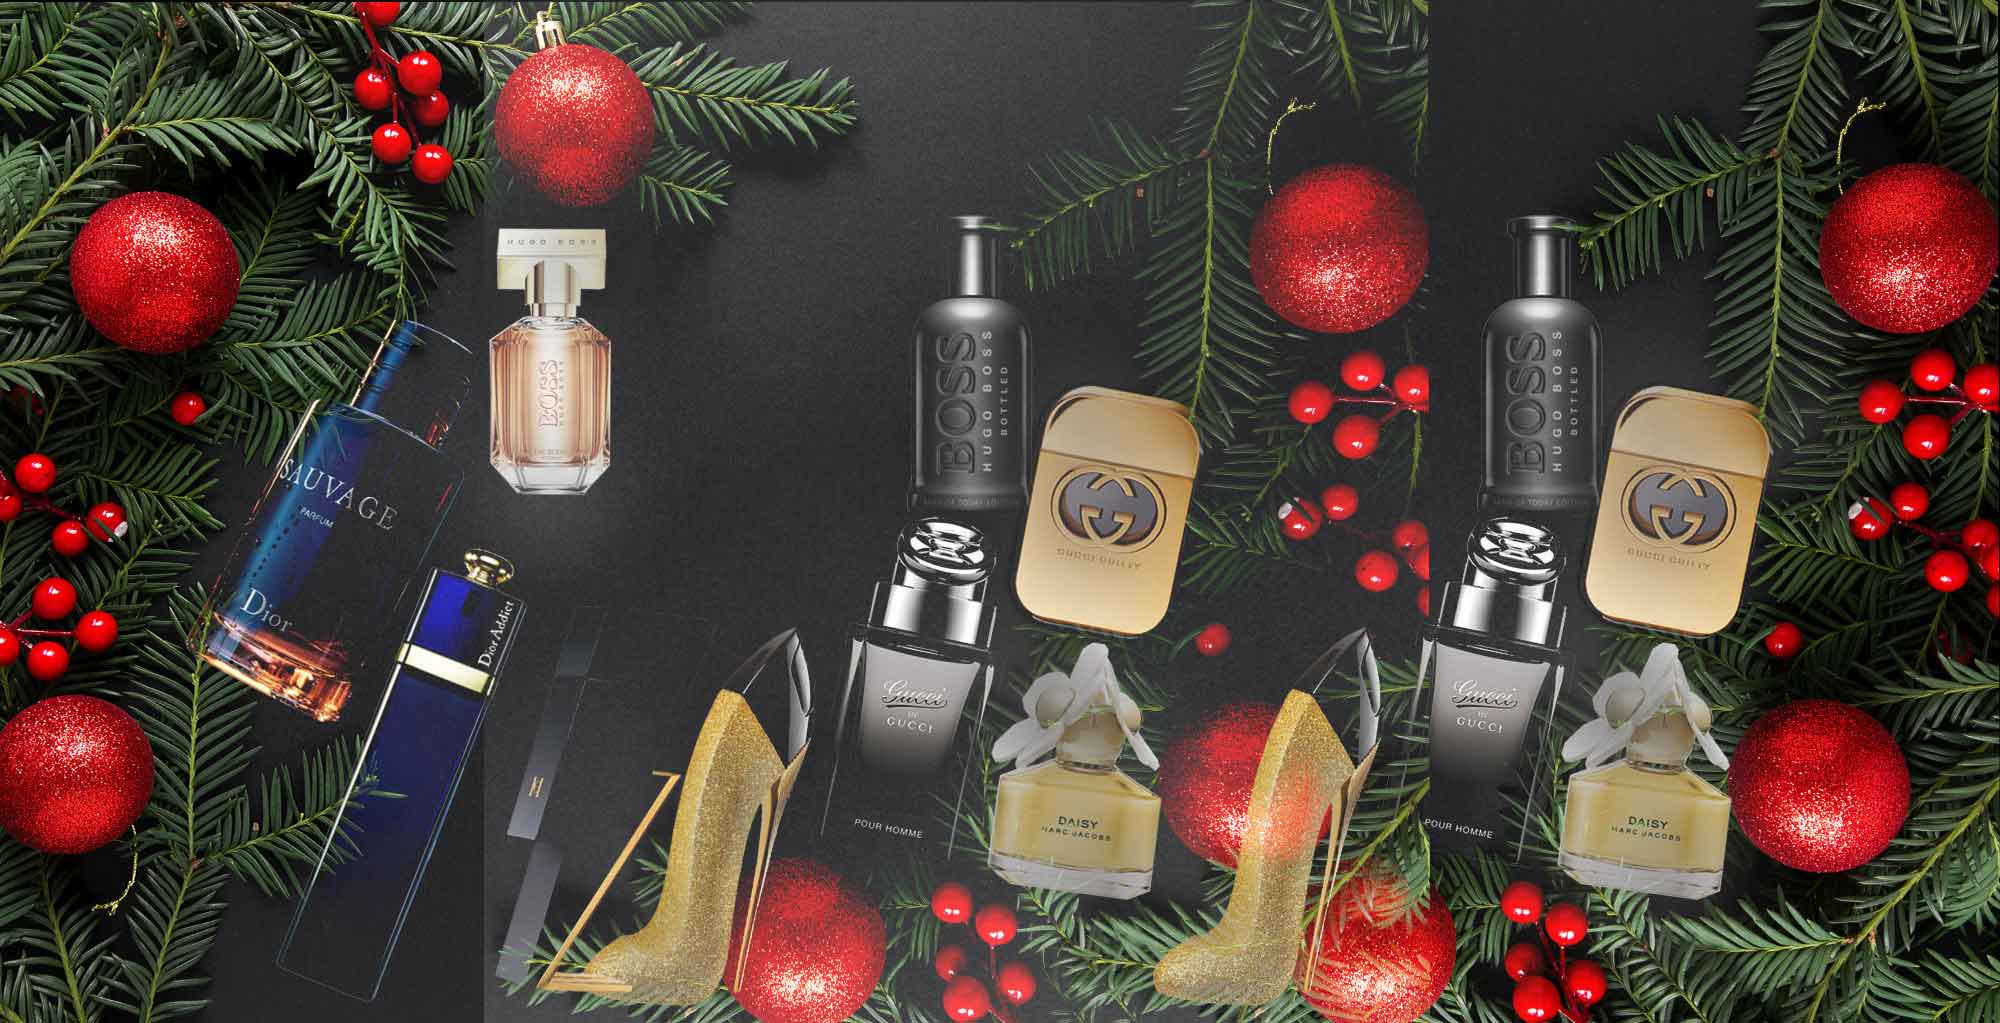 How to buy the perfumes every woman will want this Christmas